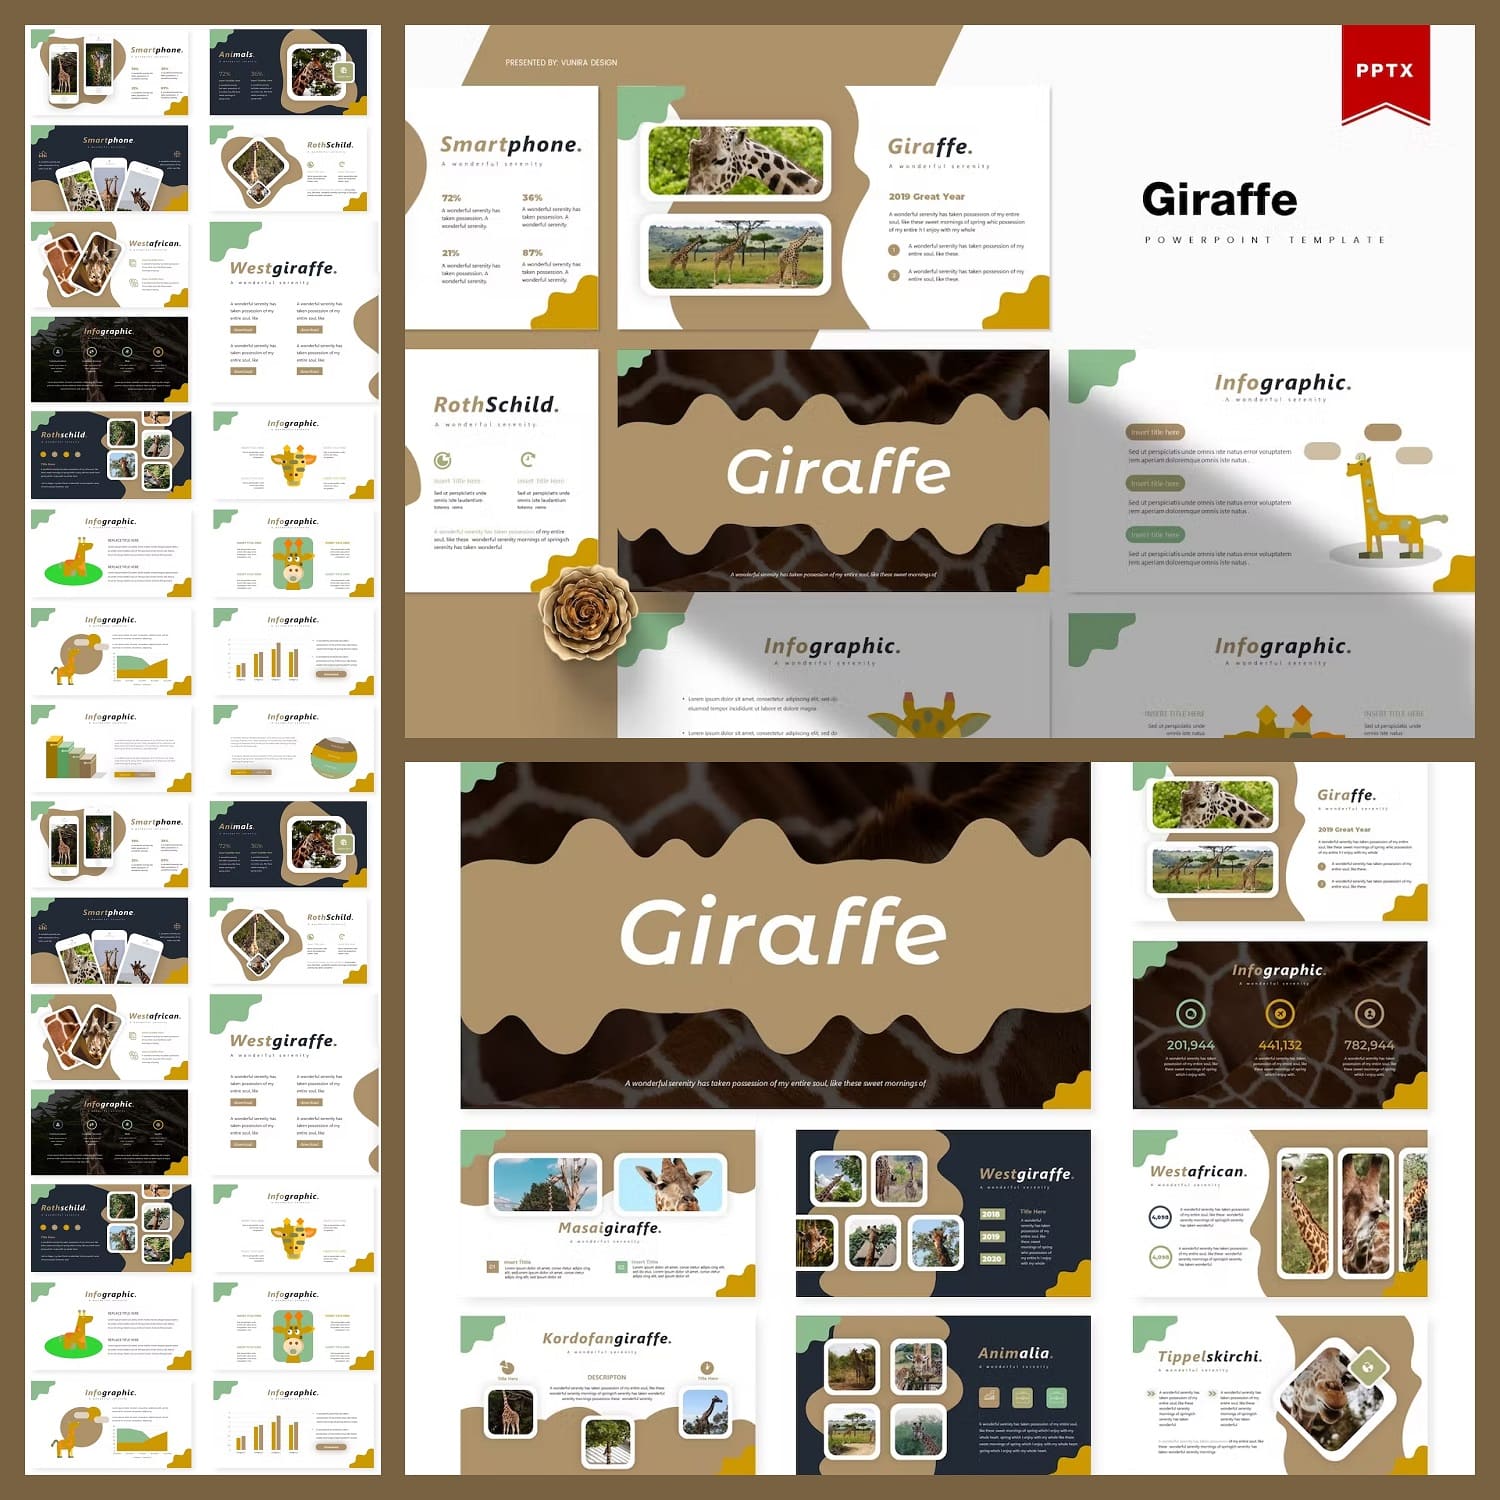 Preview Giraffe | Powerpoint Template on the smartphone.